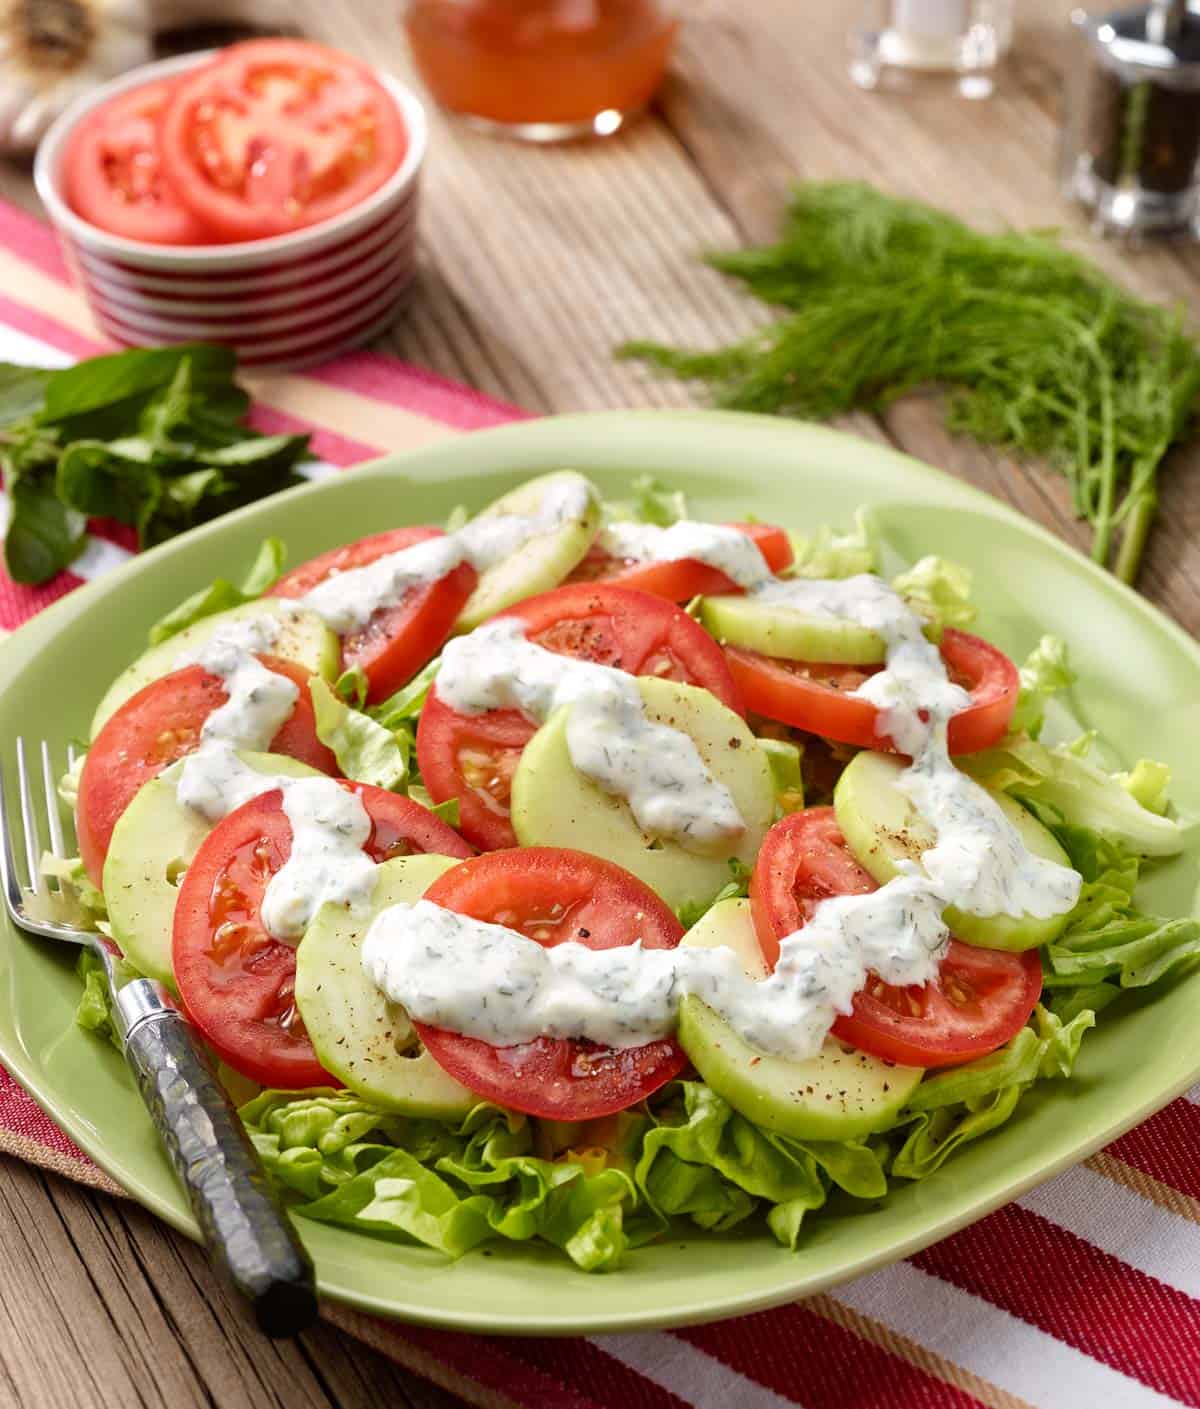 Sliced tomatoes and cucumbers with yogurt-herb dressing